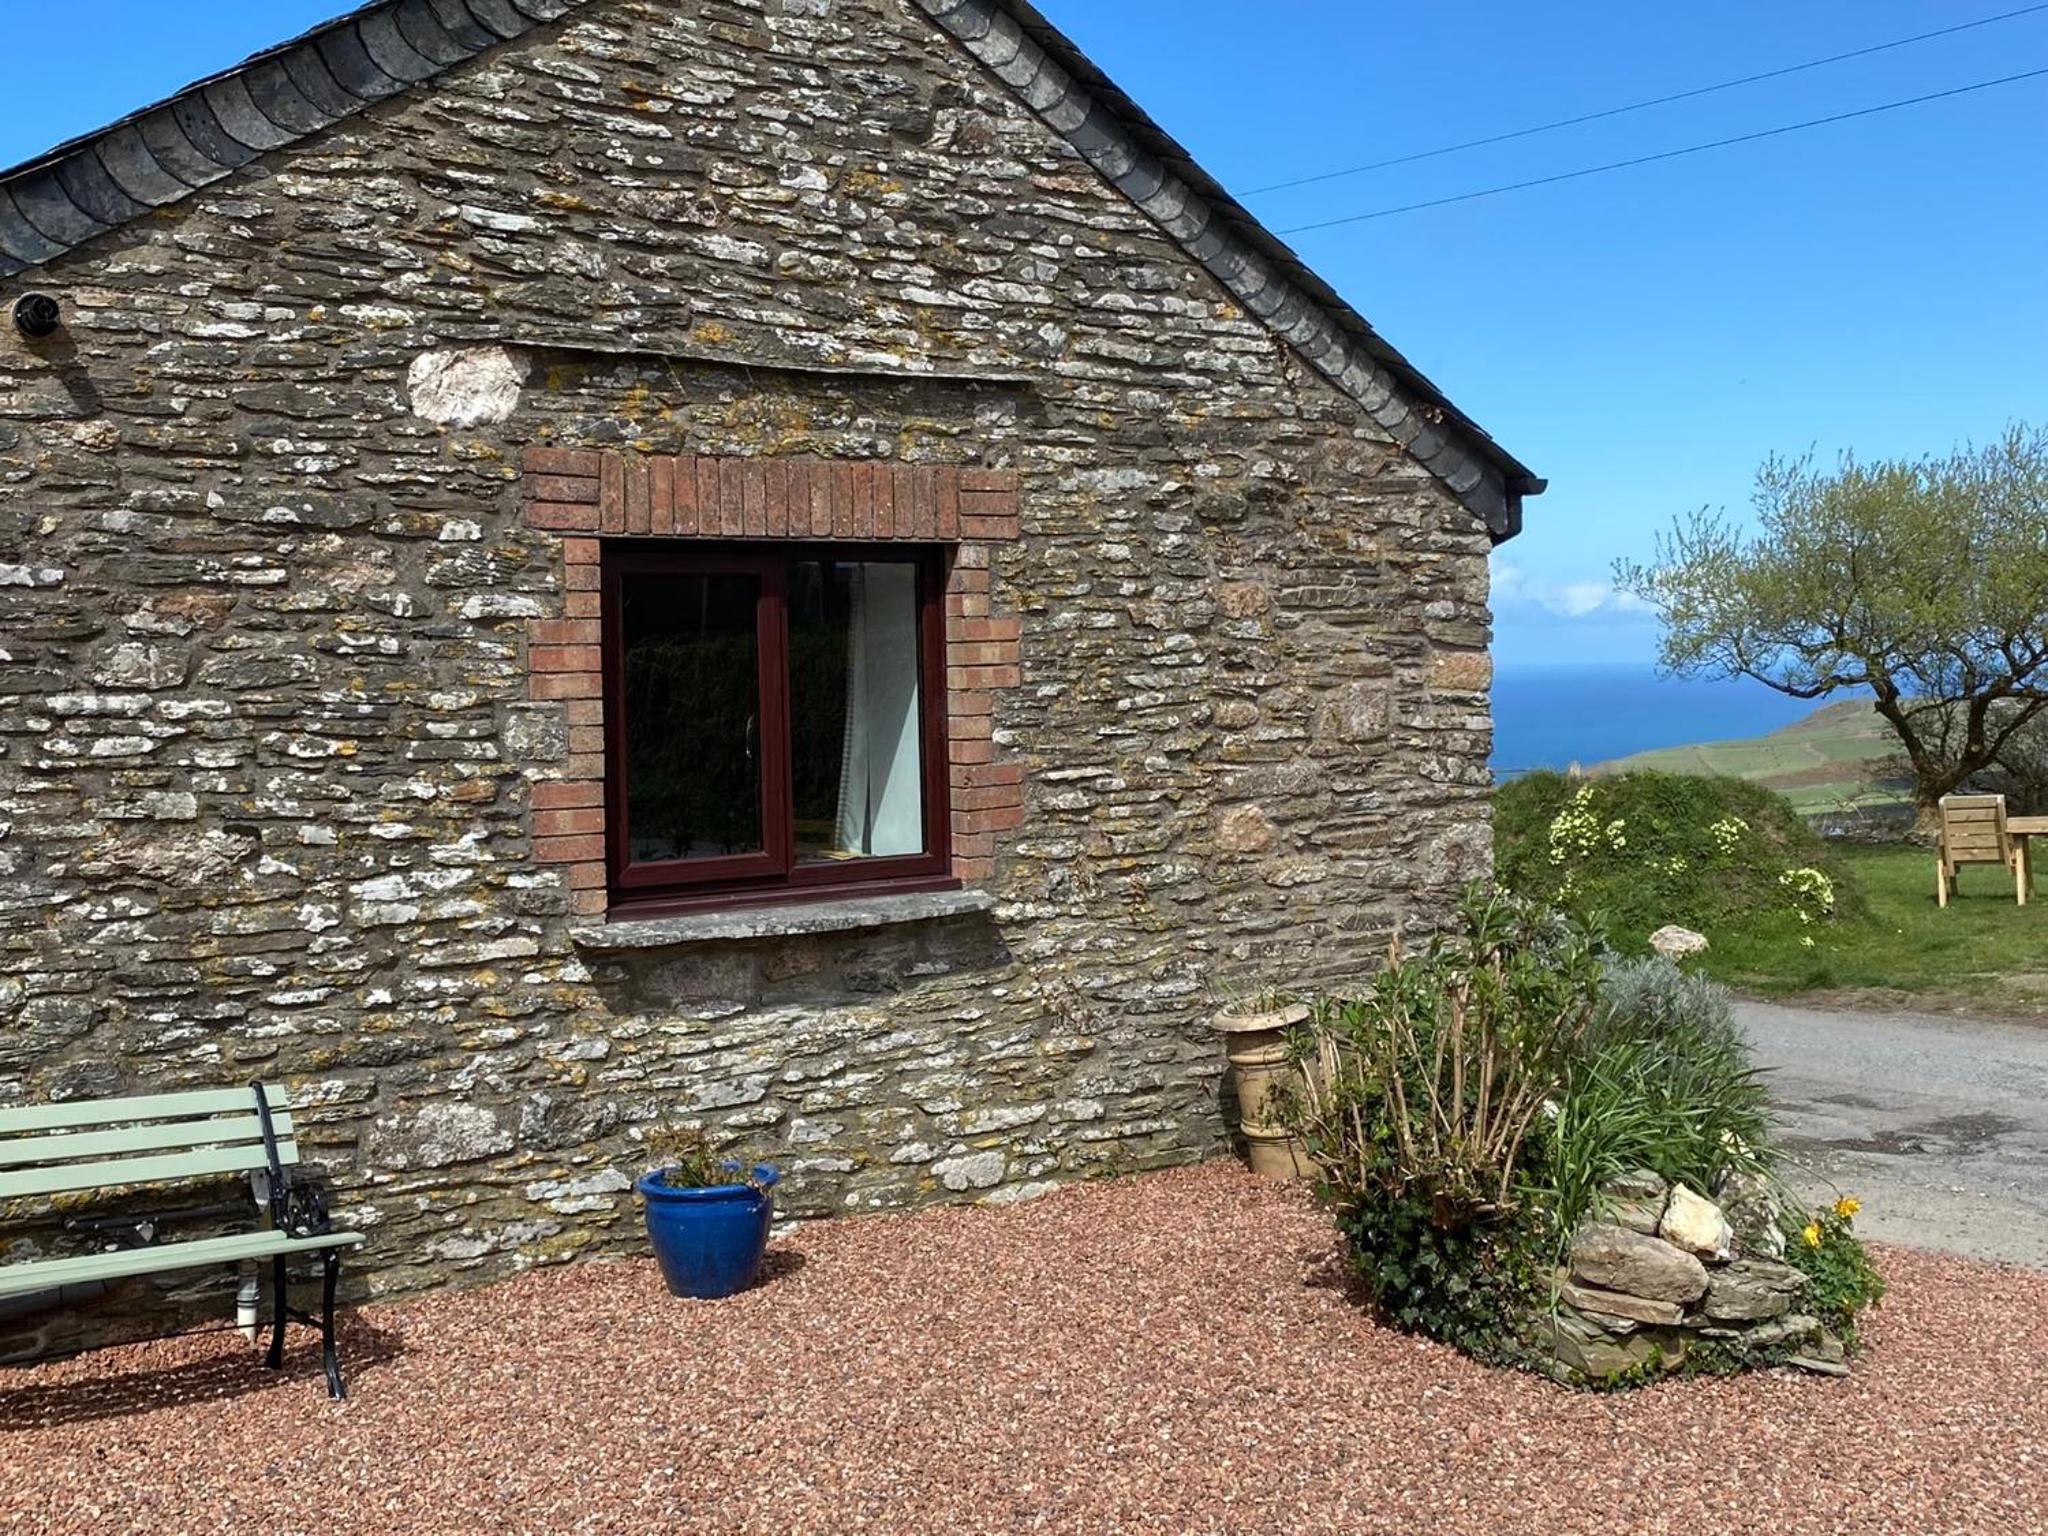 Polrunny Farm Seaberry Cottage with a sea view and log burner